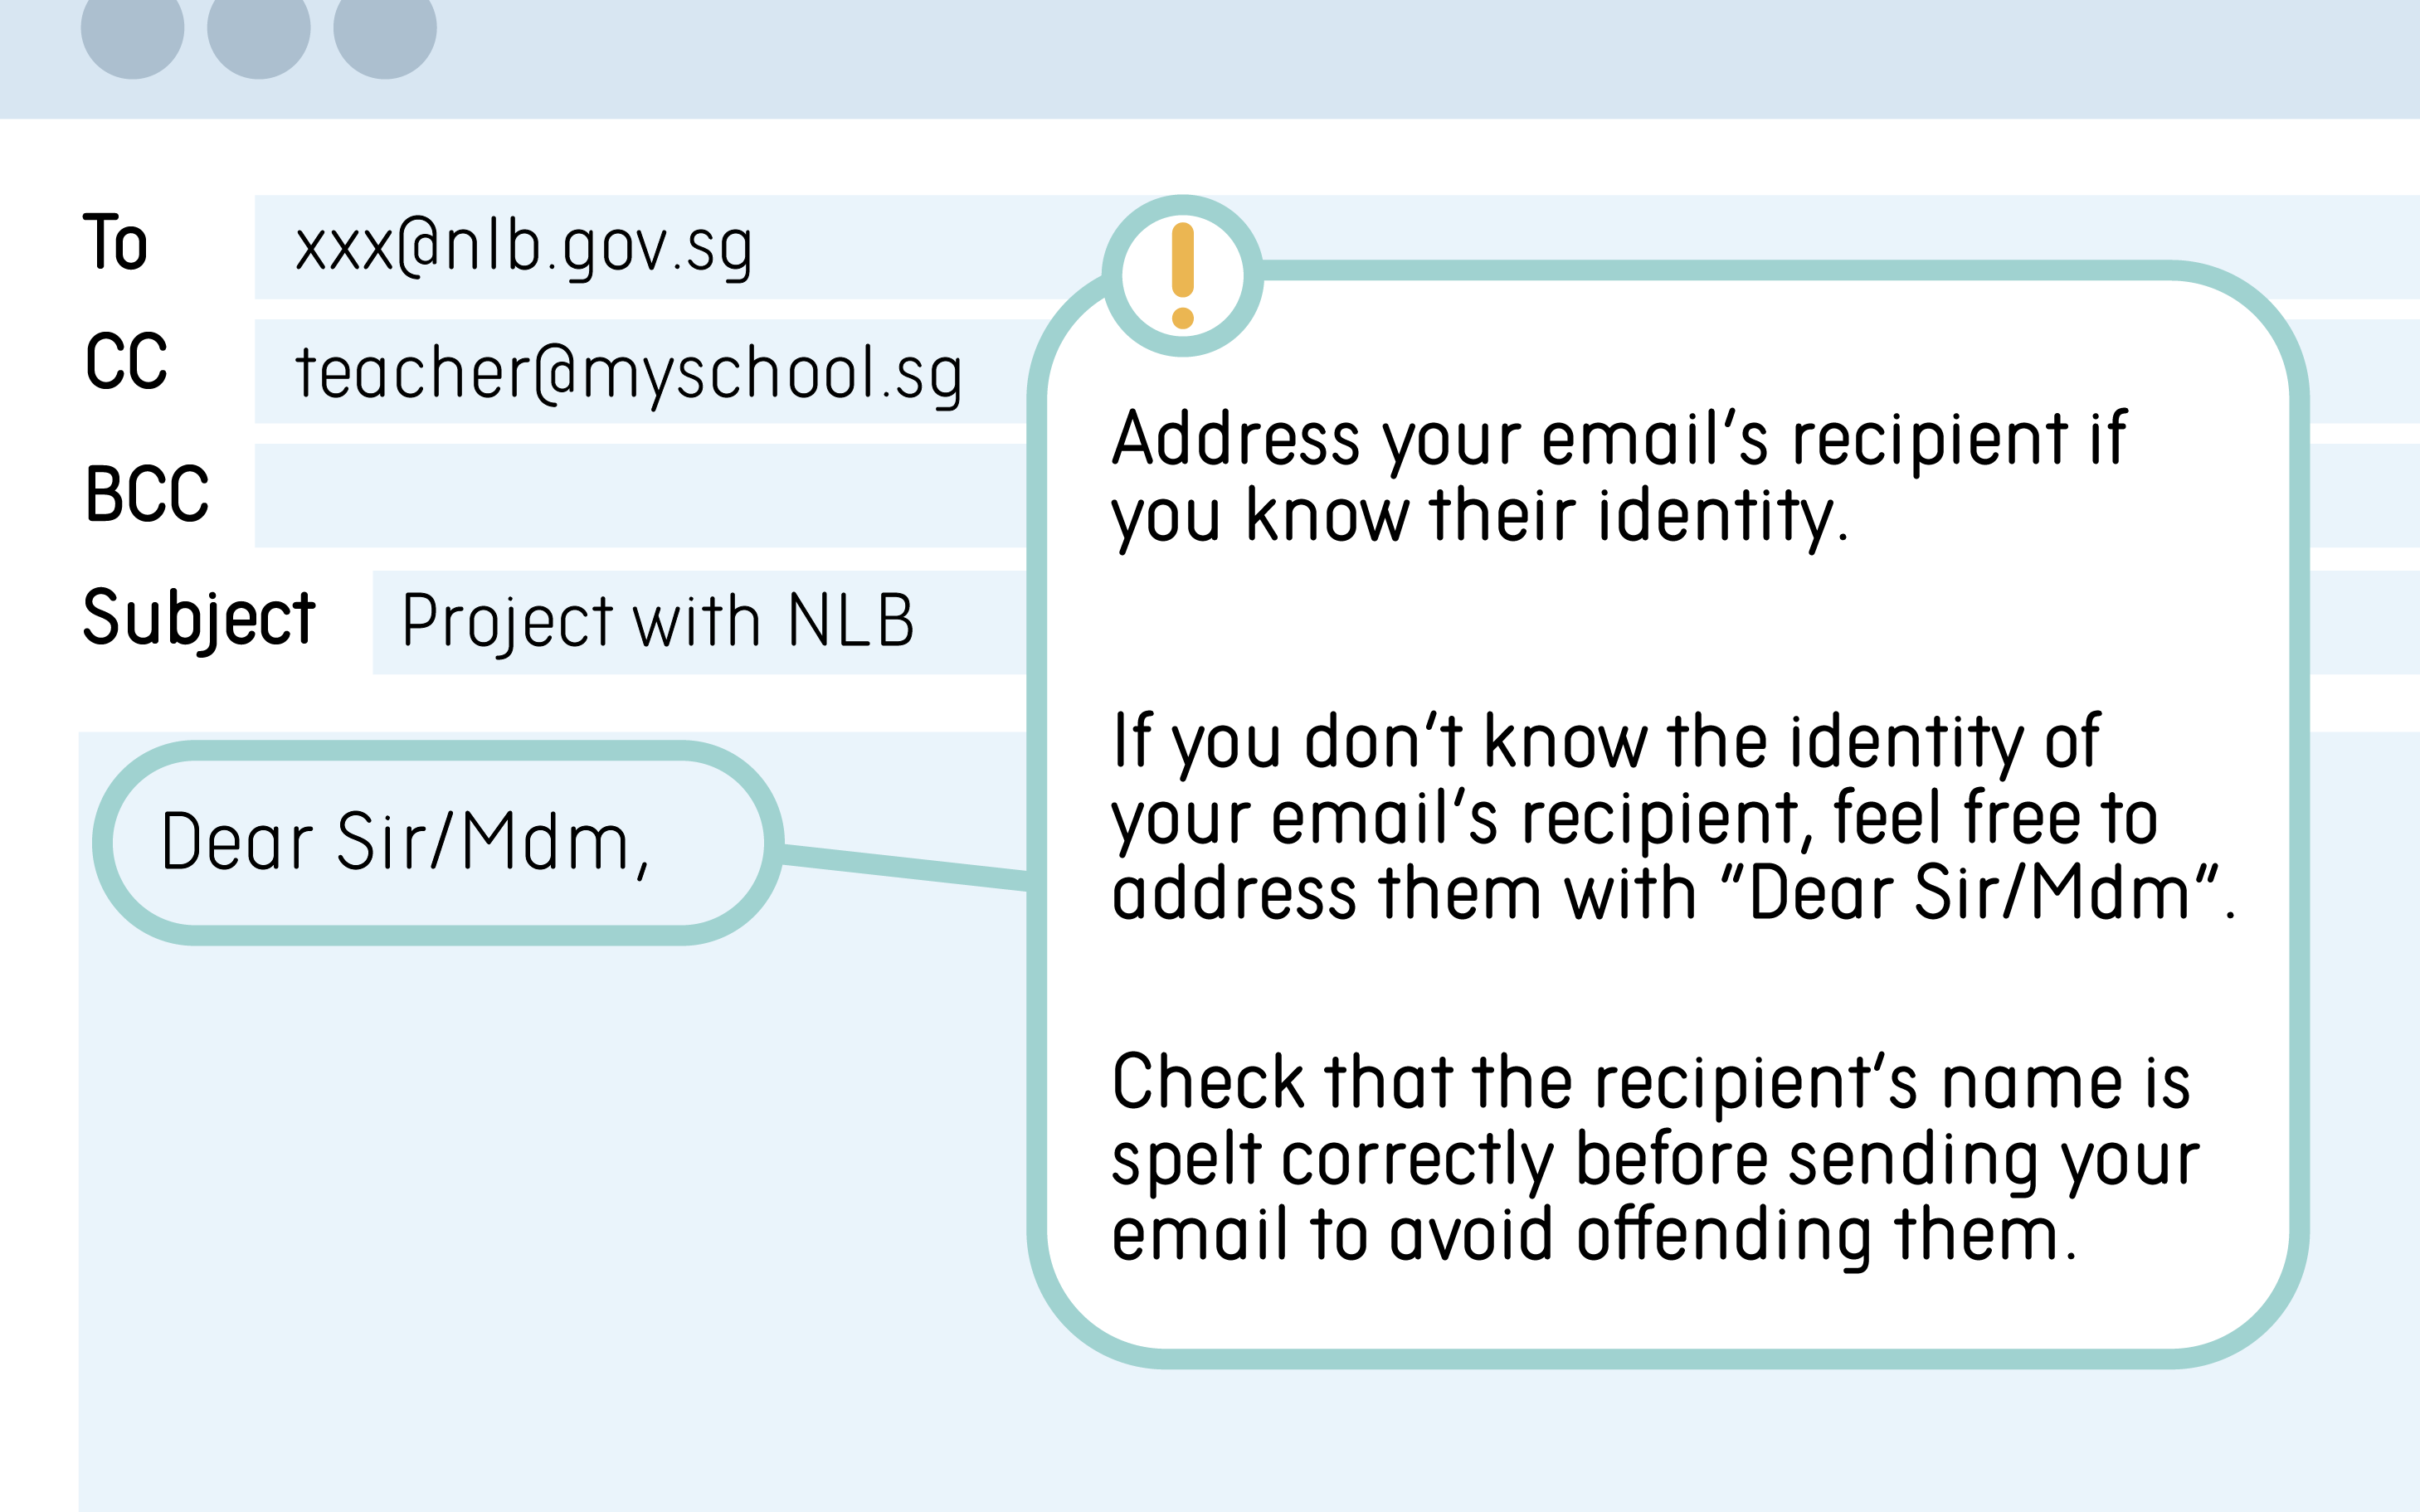 Tips: Address your email’s recipient if you know their identity. If you do not know the identity of your email’s recipient, feel free to address them with Dear Sir/Mdm. Check that the recipient’s name is spelt correctly before sending your email to avoid offending them. Example: Dear Sir/Mdm,